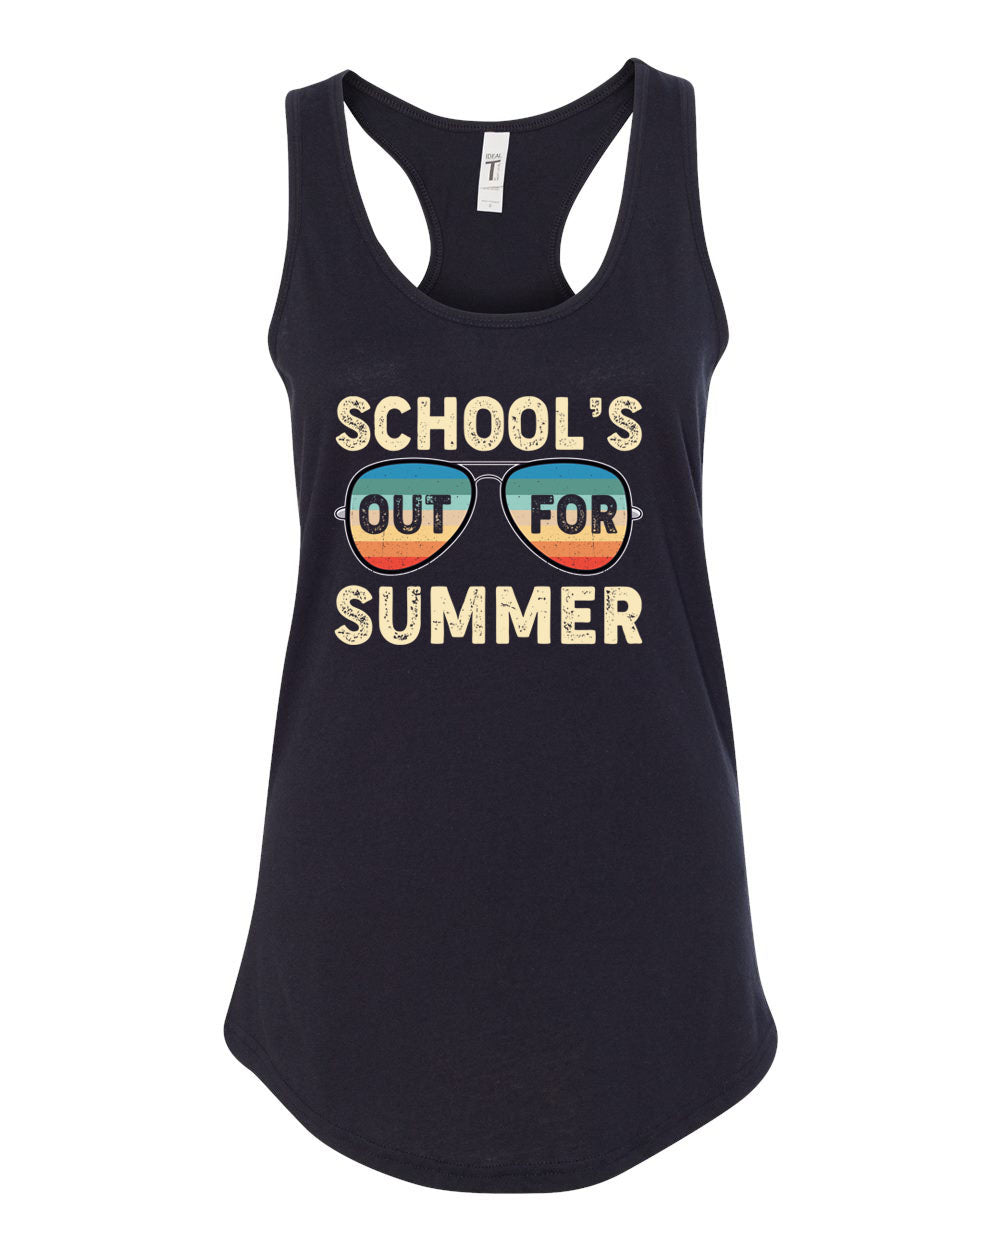 School's Out Tank Top